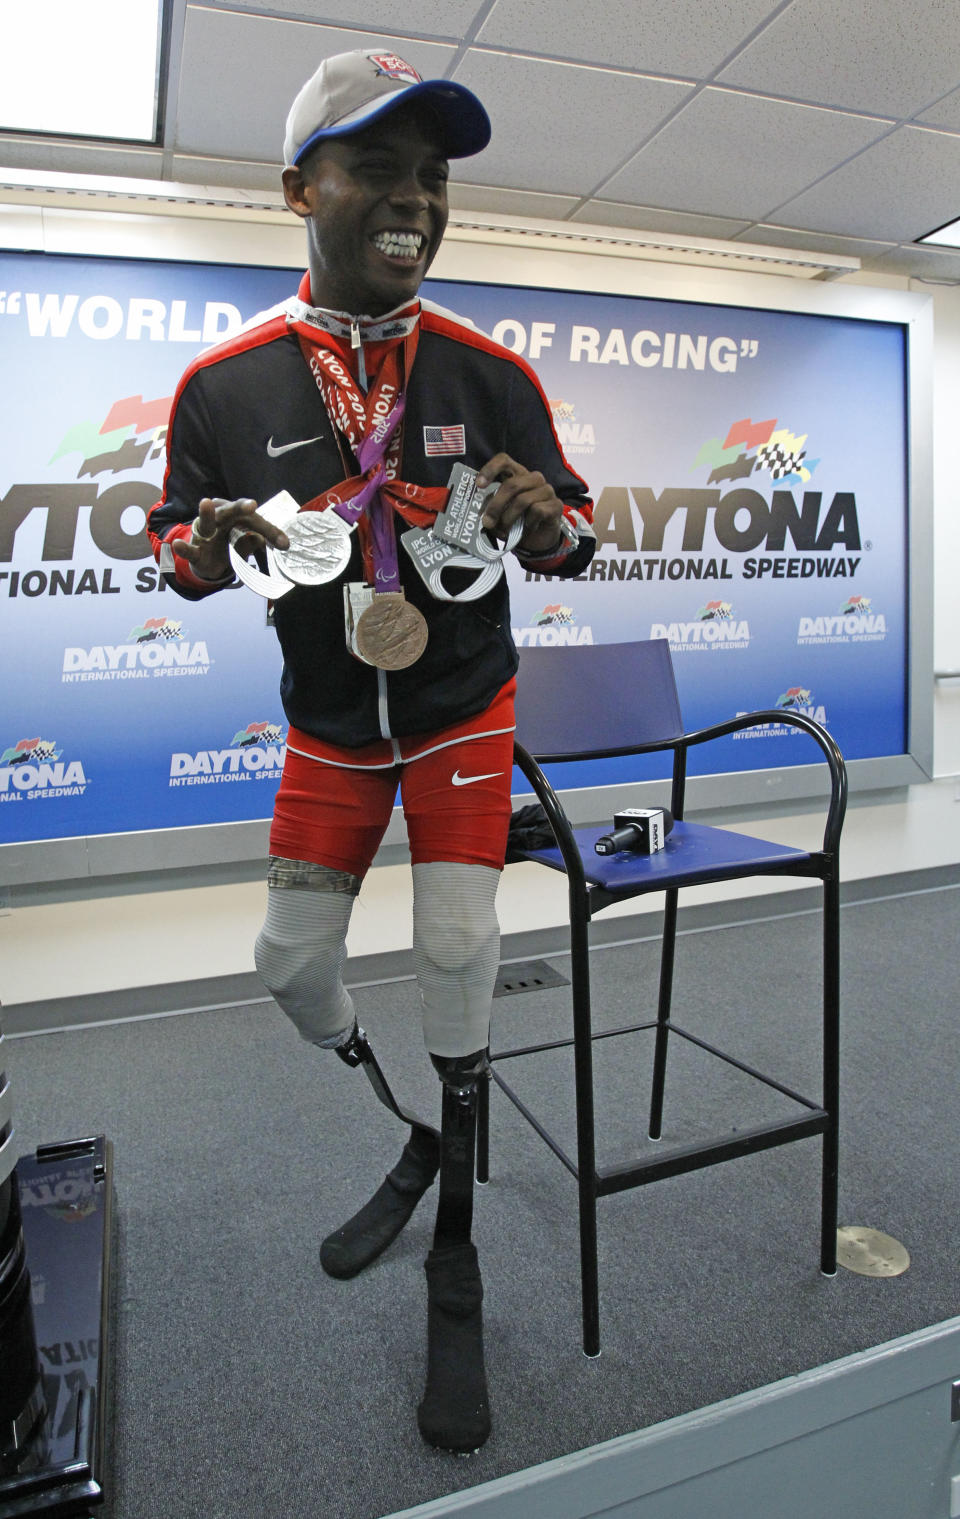 Paralympian Blake Leeper poses for photos during a news conference before the NASCAR Daytona 500 Sprint Cup series auto race at Daytona International Speedway in Daytona Beach, Fla., Sunday, Feb. 23, 2014. Leeper will deliver the green flag to start the race. (AP Photo/Terry Renna)